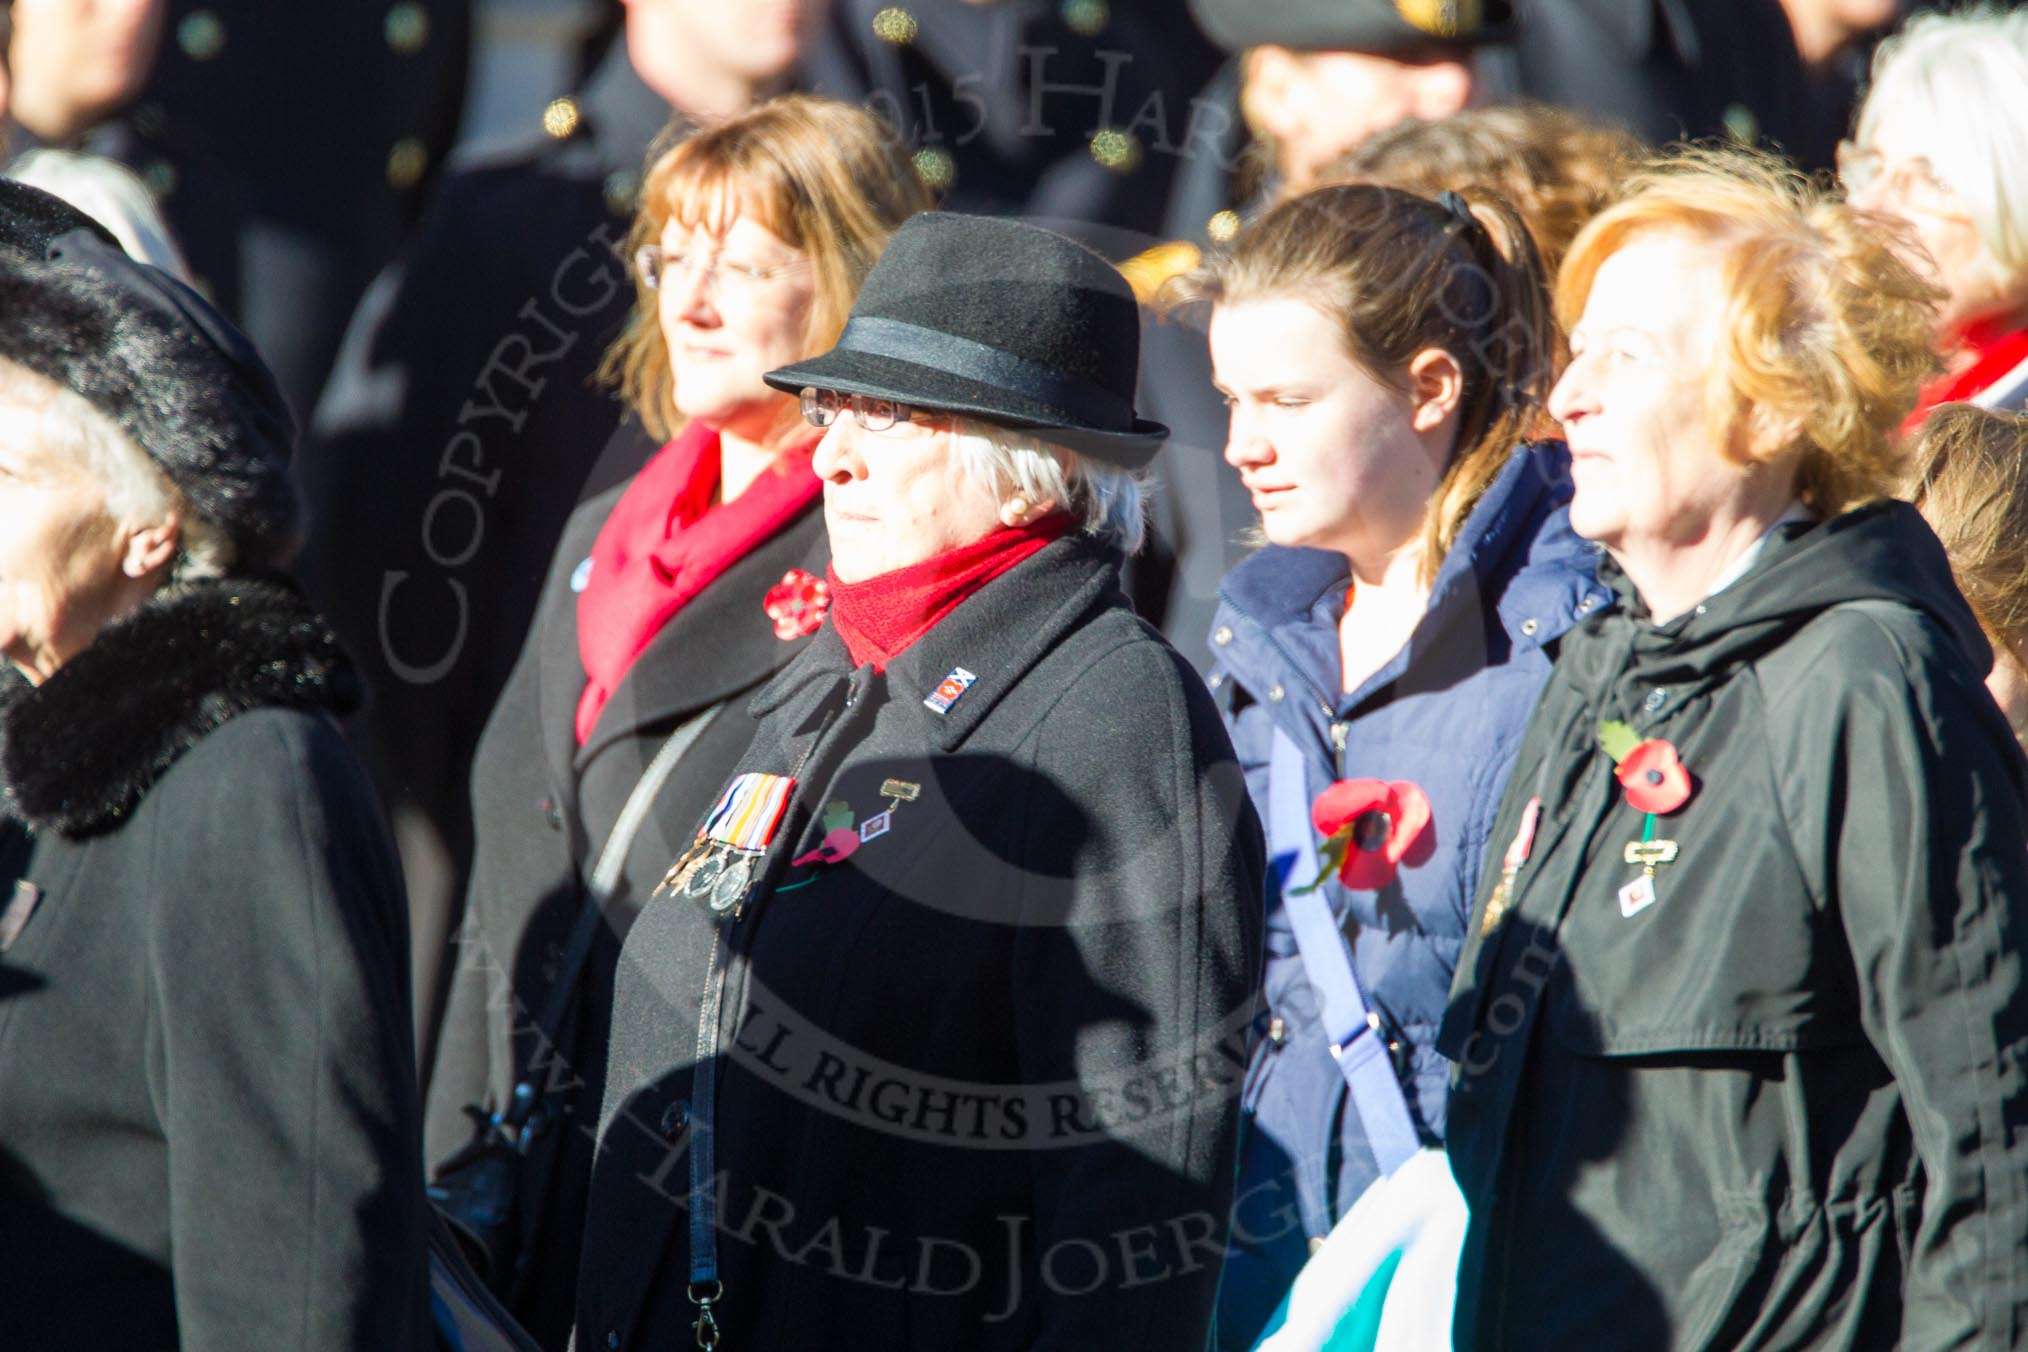 Remembrance Sunday Cenotaph March Past 2013: D1 - War Widows Association. The War Widows' Association exisits to improve the conditions of all War Widow/ers in the United Kingdom. The Association formed in 1971 following an article in a Sunday newspaper that highlighted the plight of Britain’s “forgotten women”. The Association gained charitable status in 1991 and continues to campaign against injustice..
Press stand opposite the Foreign Office building, Whitehall, London SW1,
London,
Greater London,
United Kingdom,
on 10 November 2013 at 11:38, image #21